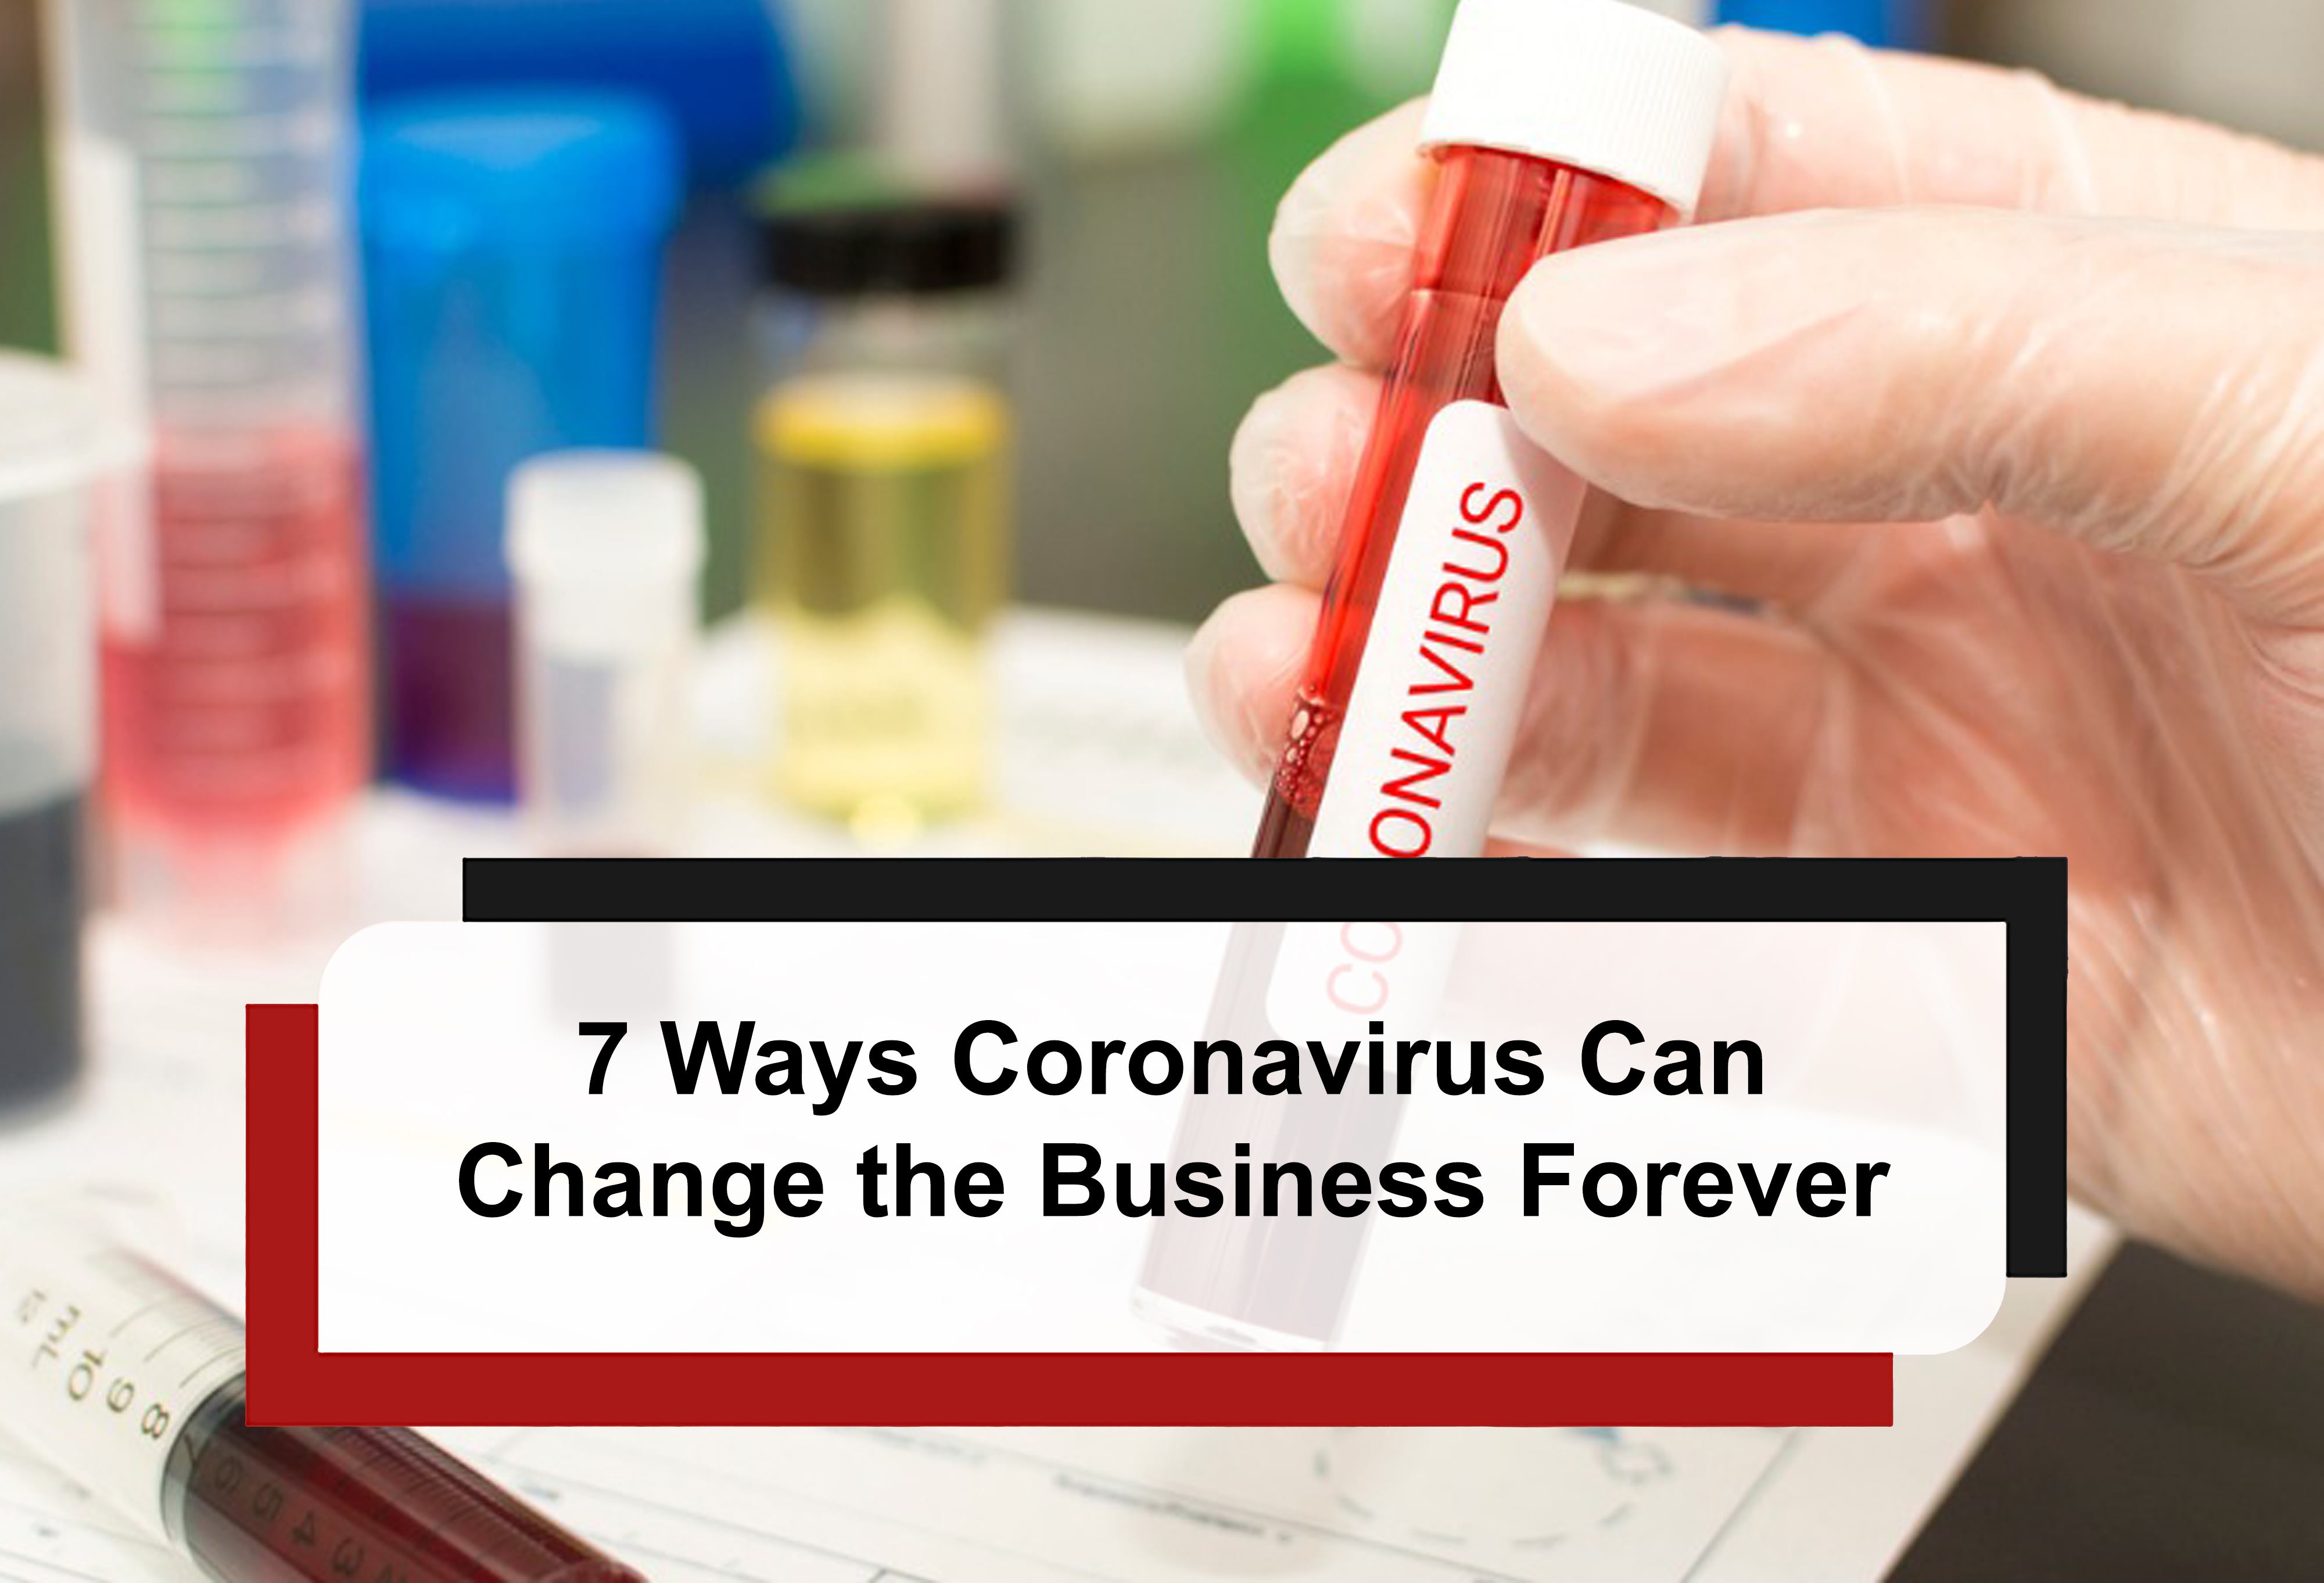 You are currently viewing Tax service in Toronto got tough, know these 7 Ways Coronavirus Can Change the Business Forever